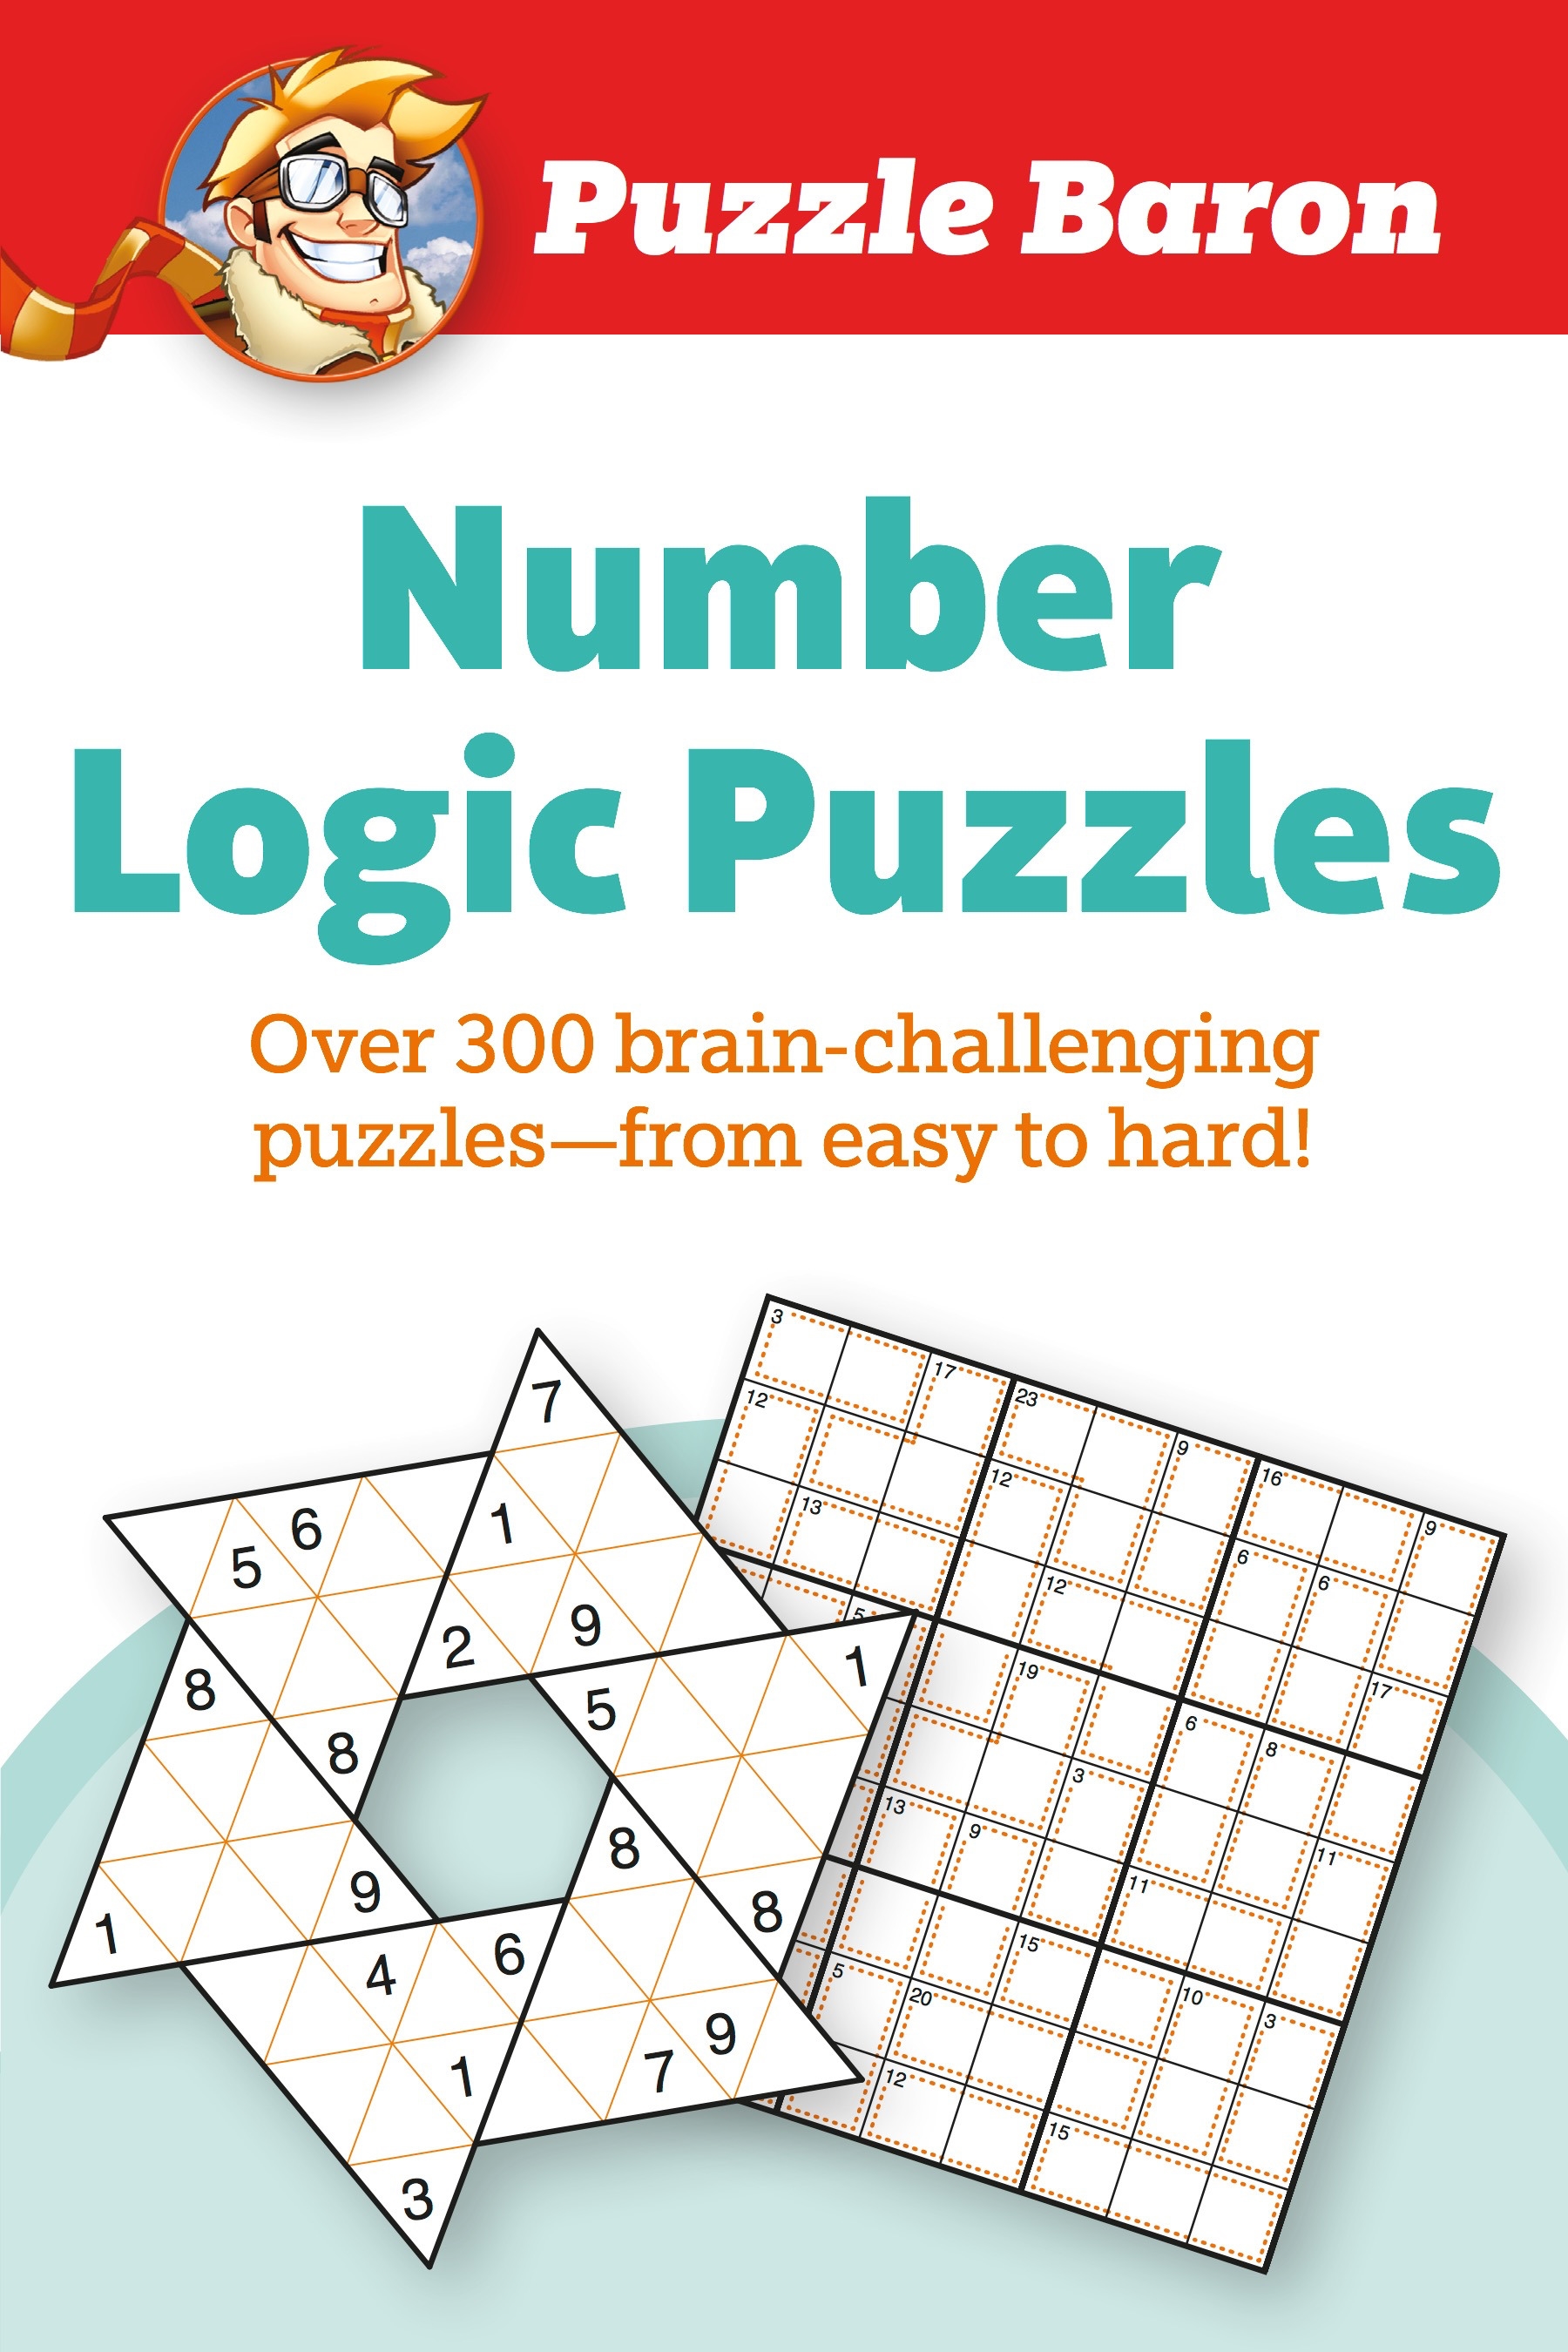 all number fill ins puzzles